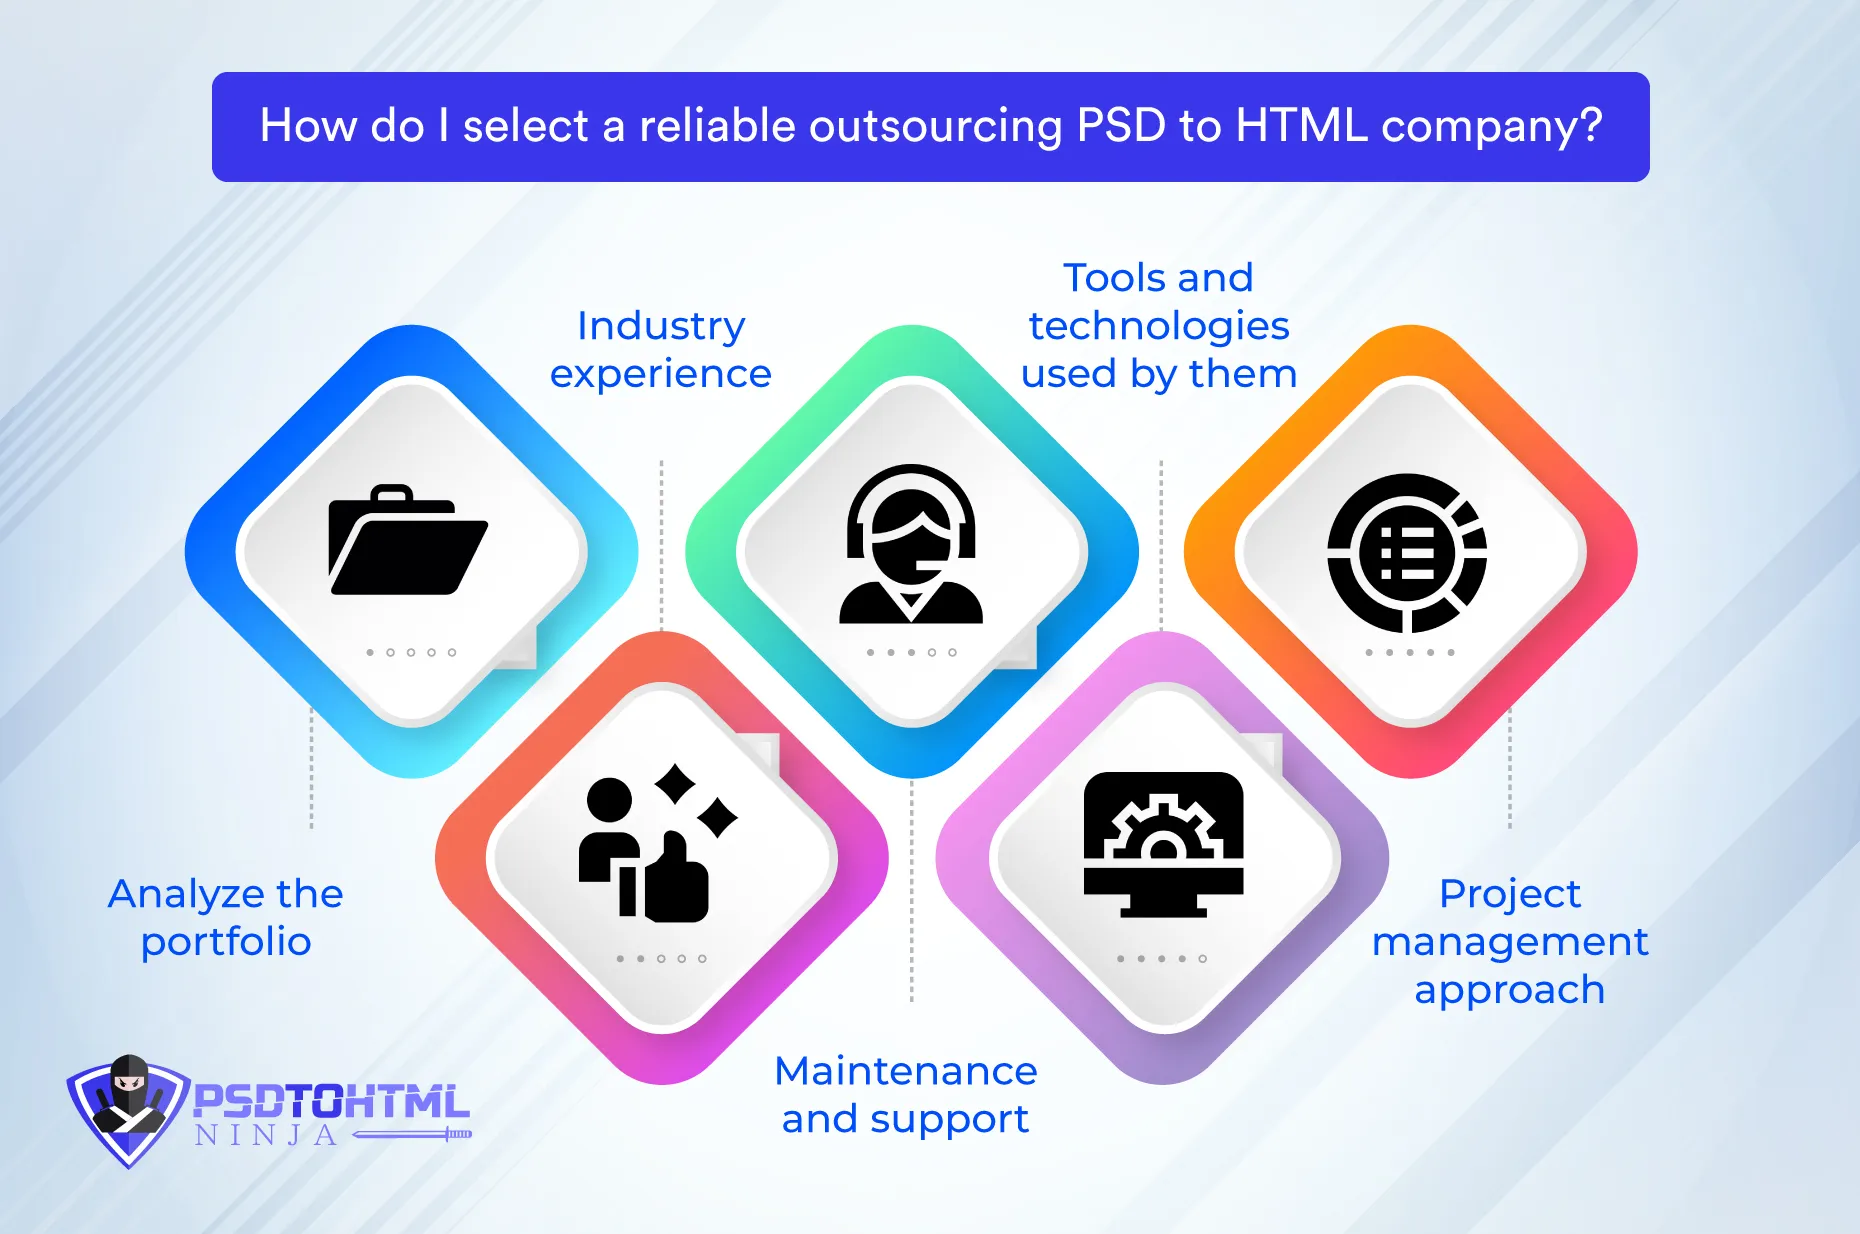 How do I select a reliable outsourcing PSD to HTML company?